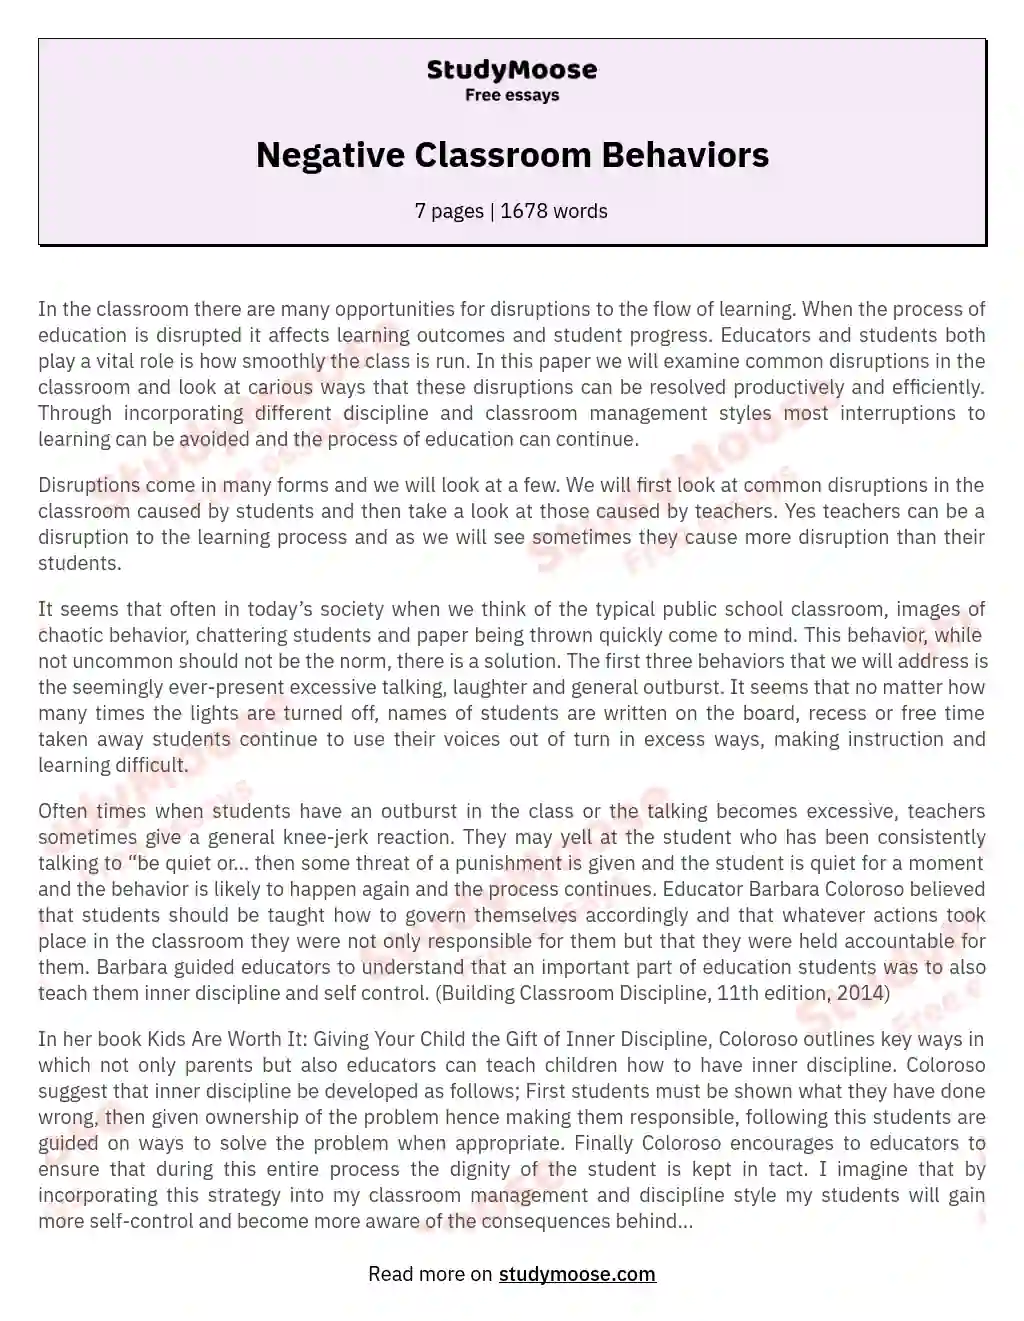 Managing Classroom Disruptions for Effective Learning essay